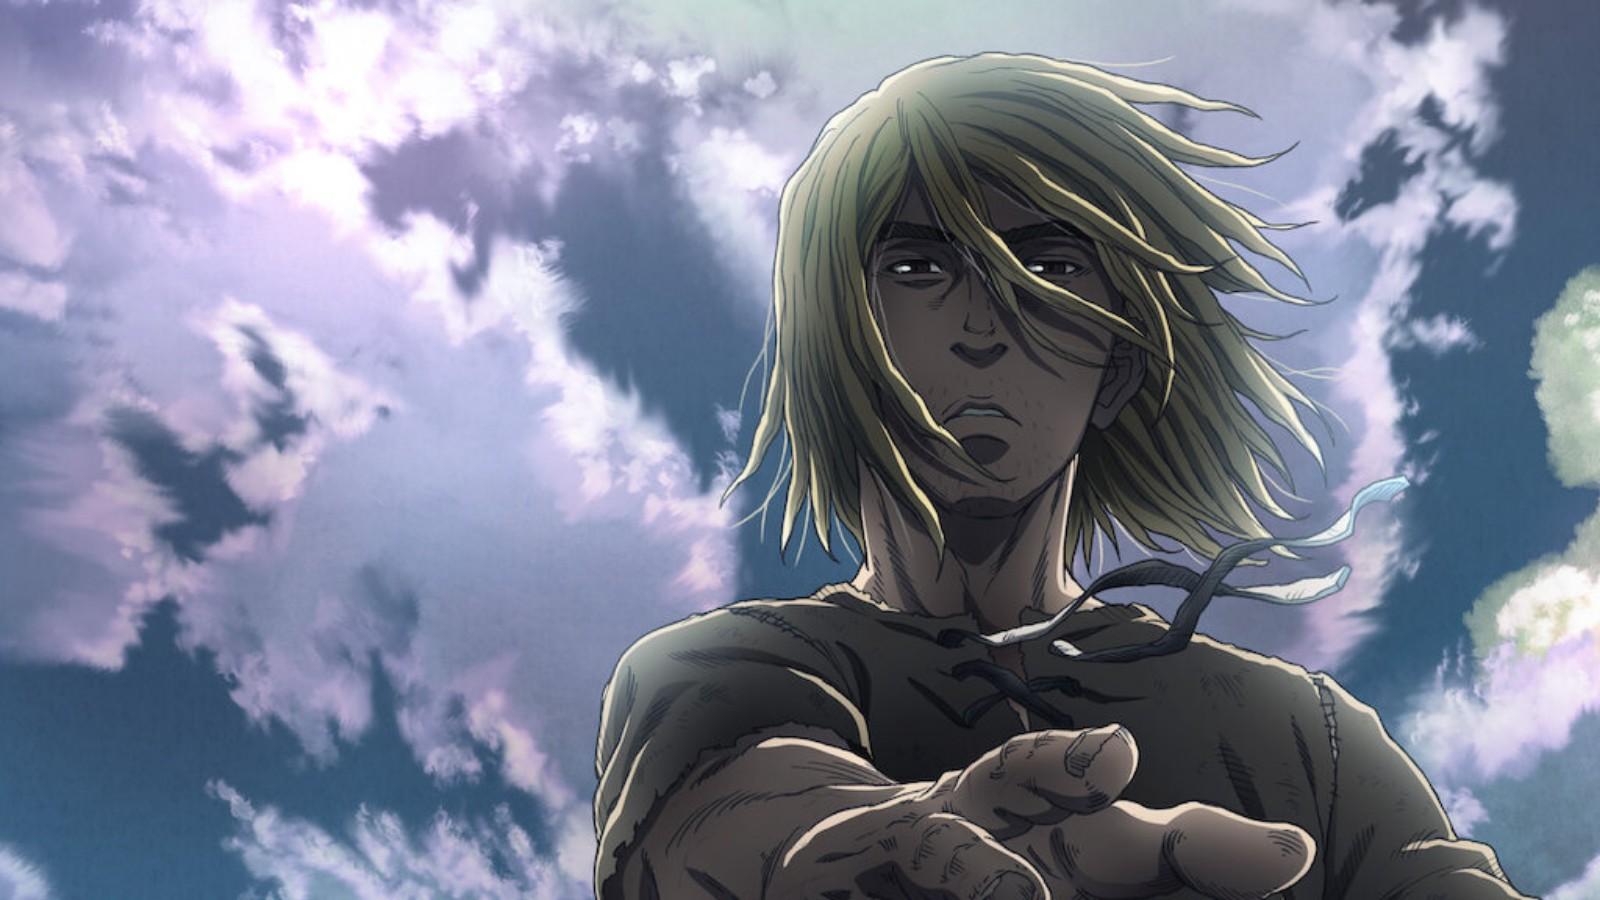 Vinland Saga 2: Age of all important characters